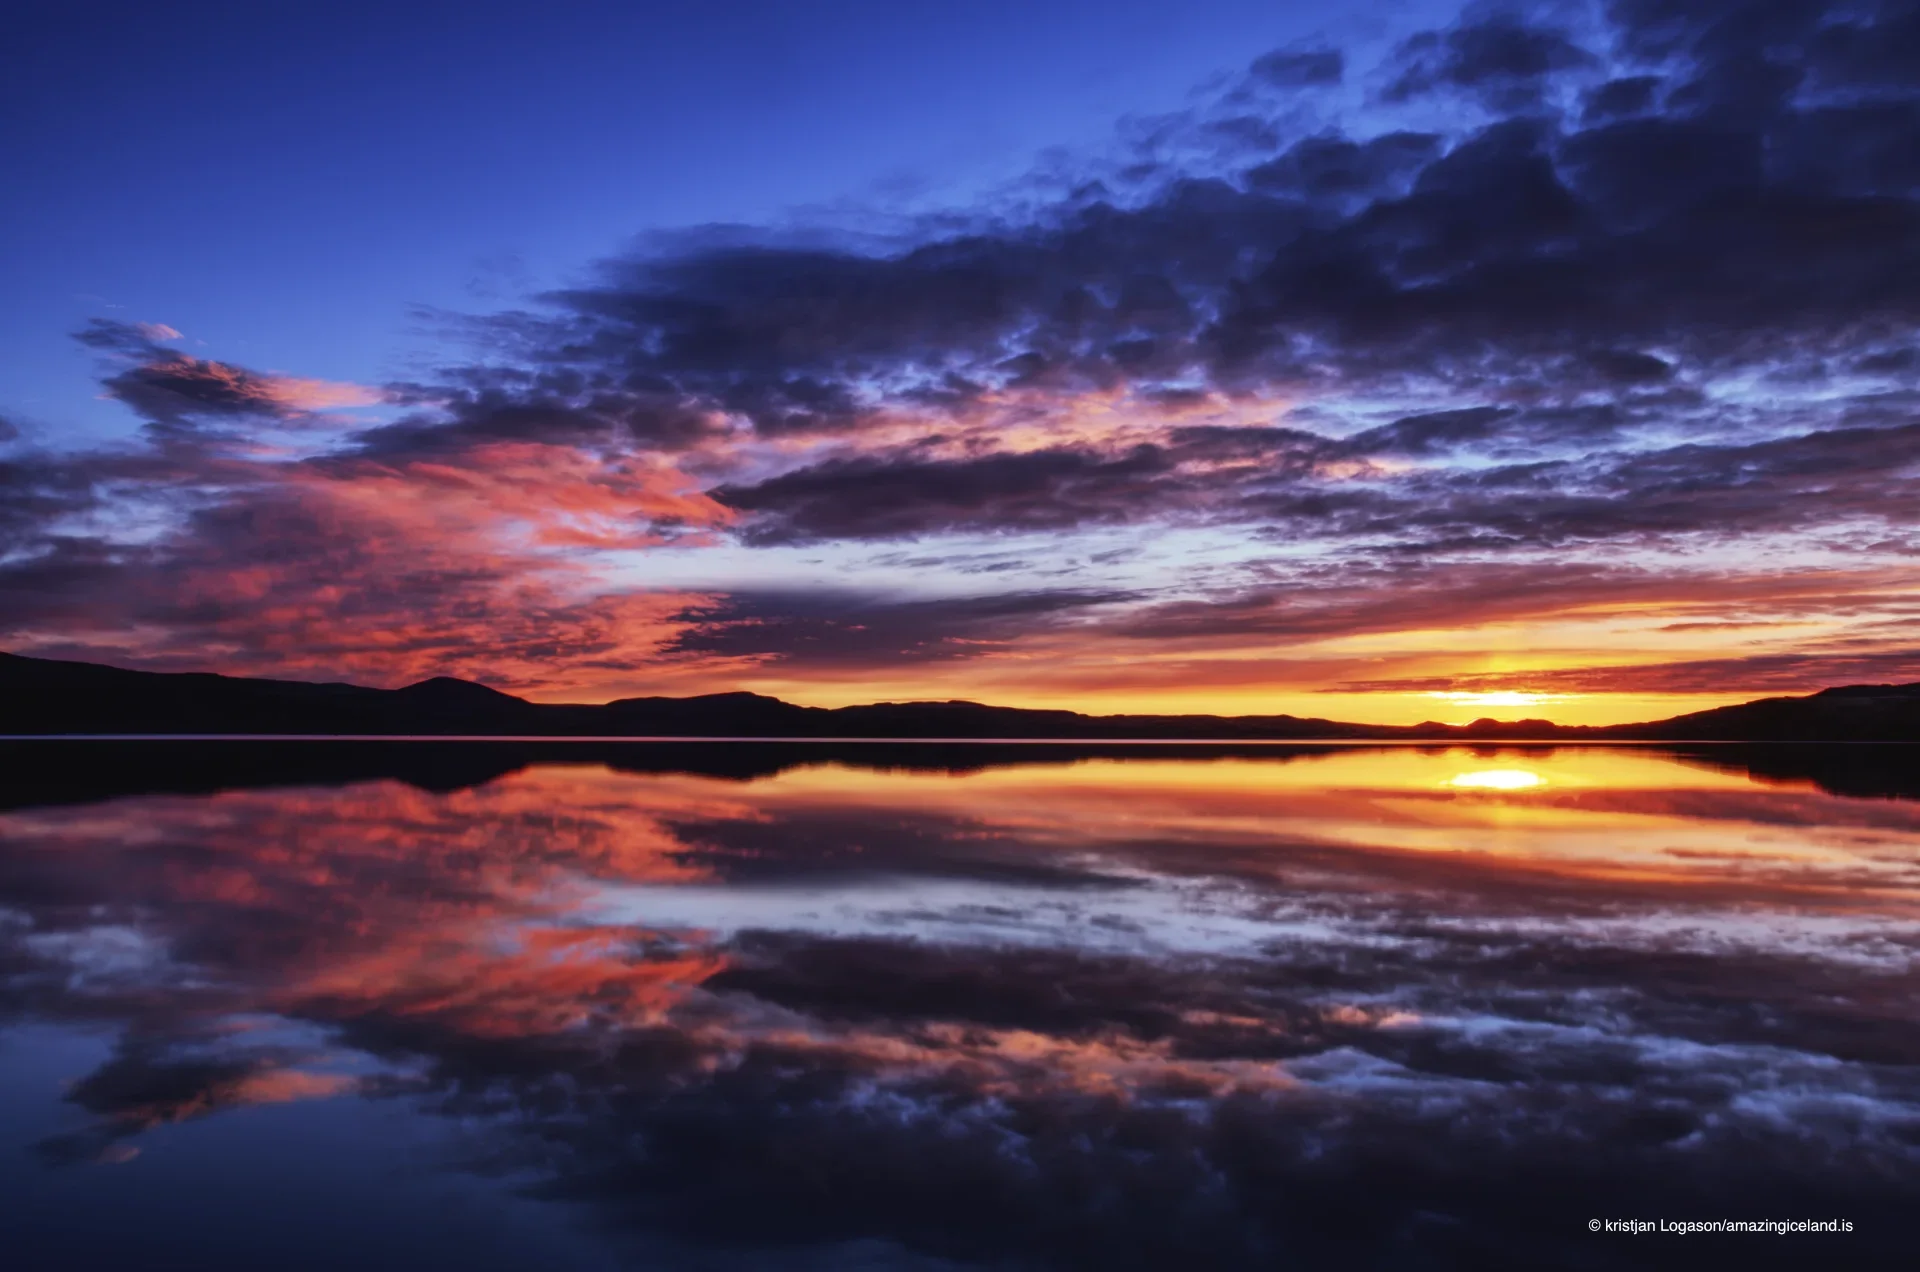 Reflection of a colorful sunset on Lake Kleifarvatn in Reykjanes peninsula in Iceland